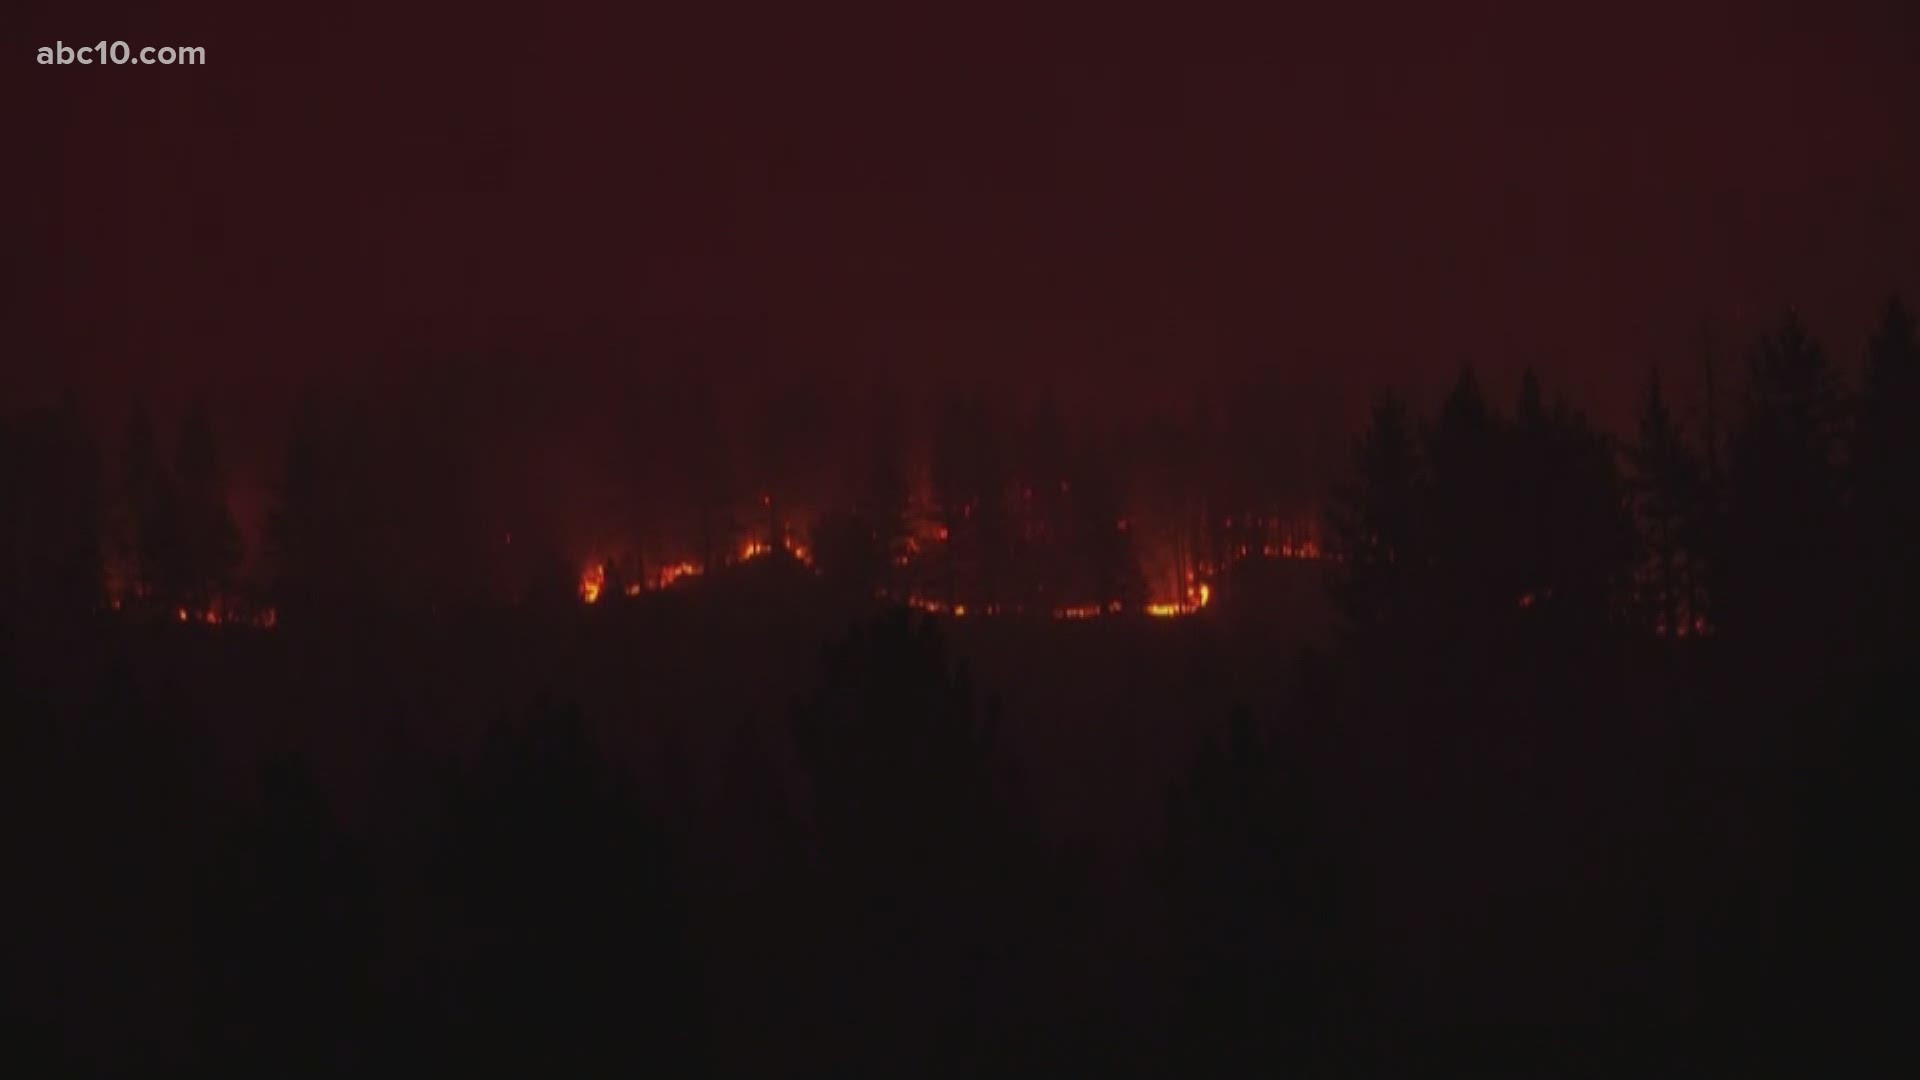 The Tamarack Fire has burned 500 acres near Markleeville and Pleasant Valley, according to the Humboldt Toiyabe National Forest.